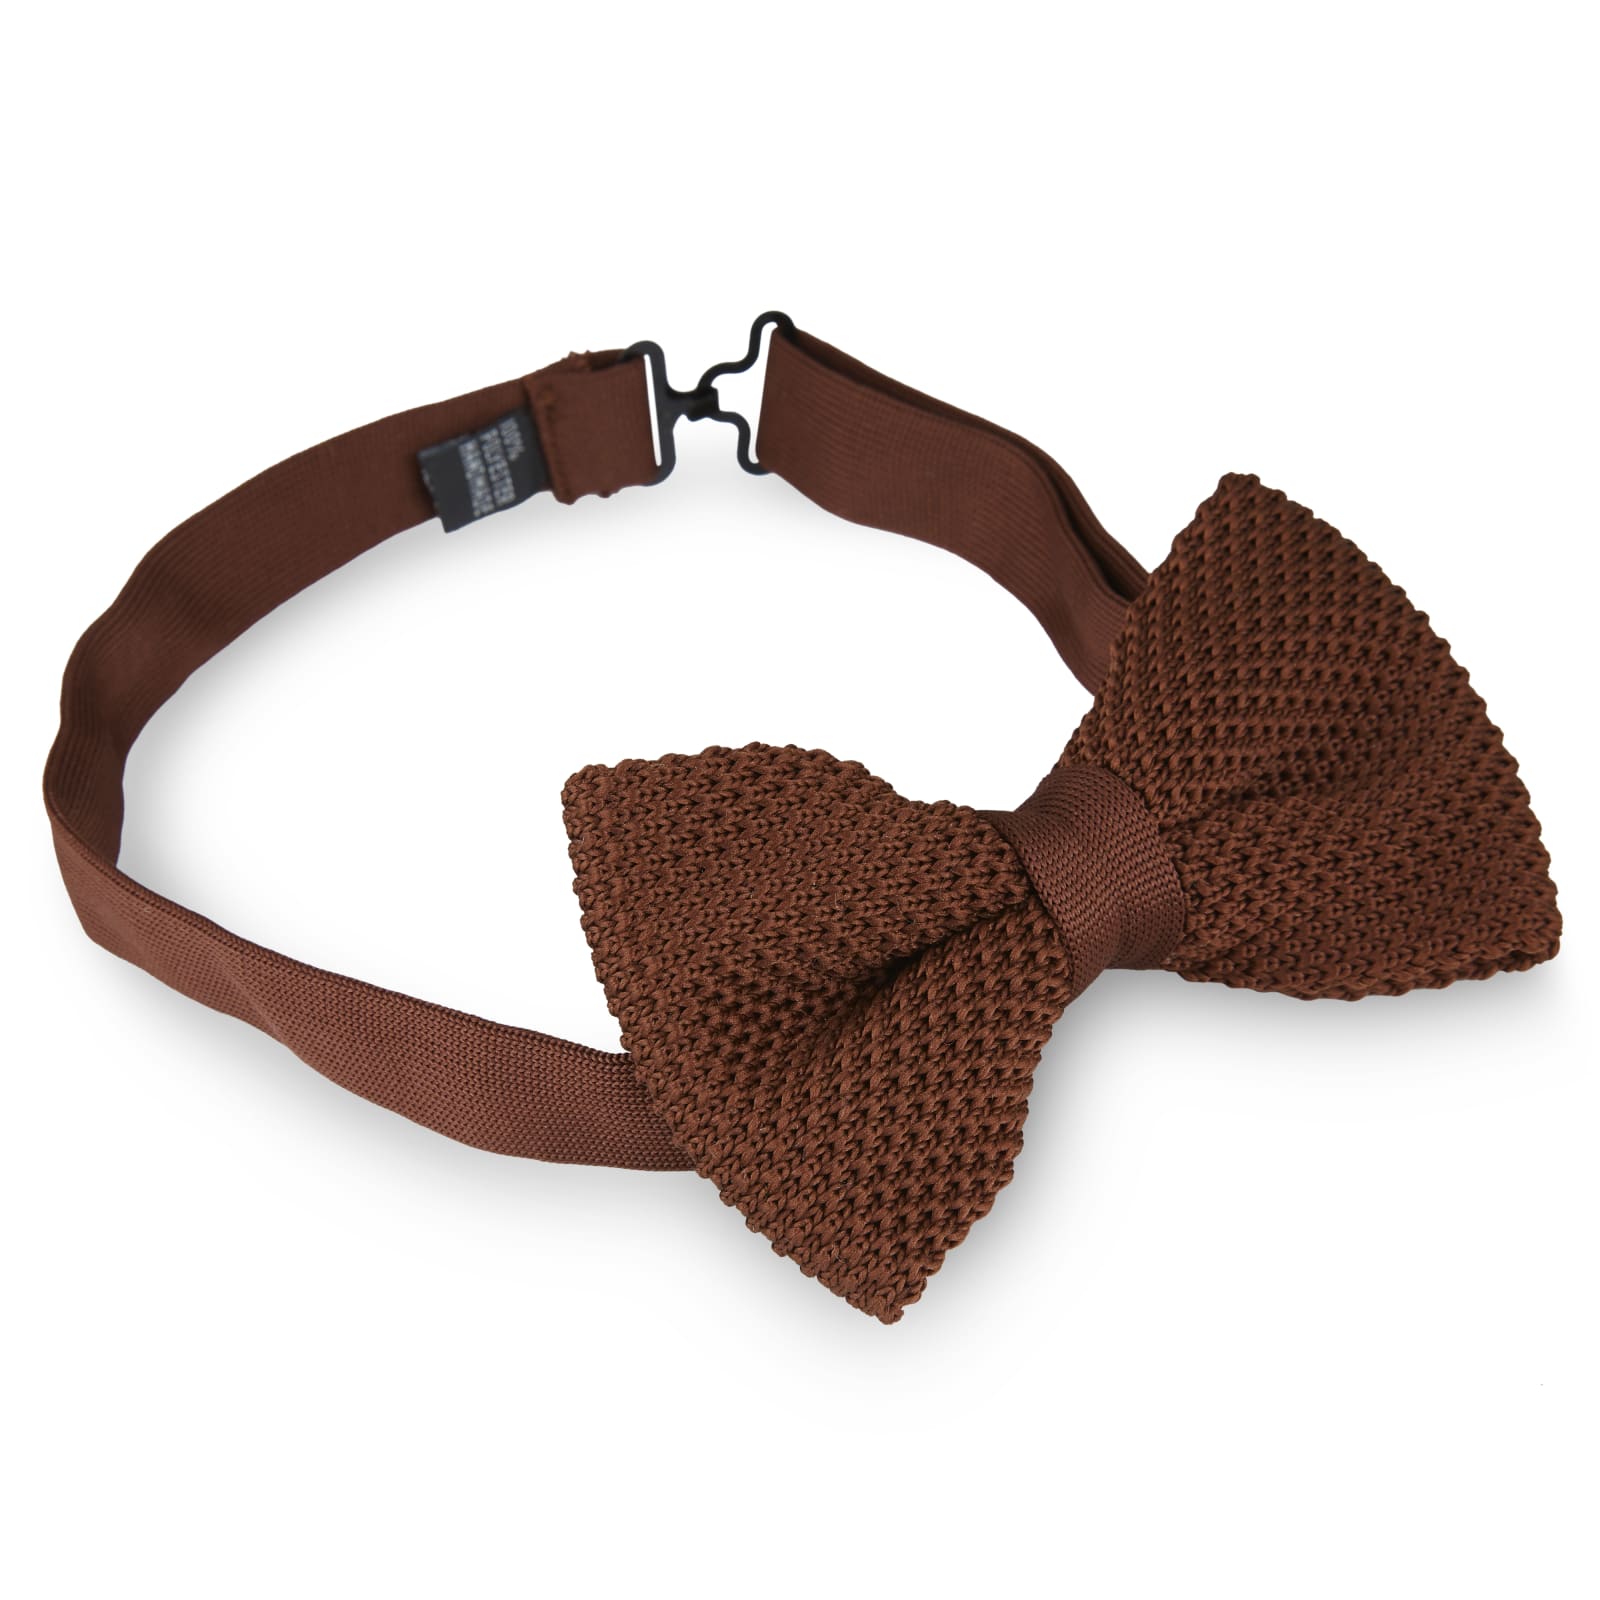 CHOCOLATE BROWN KNITTED BOW TIES